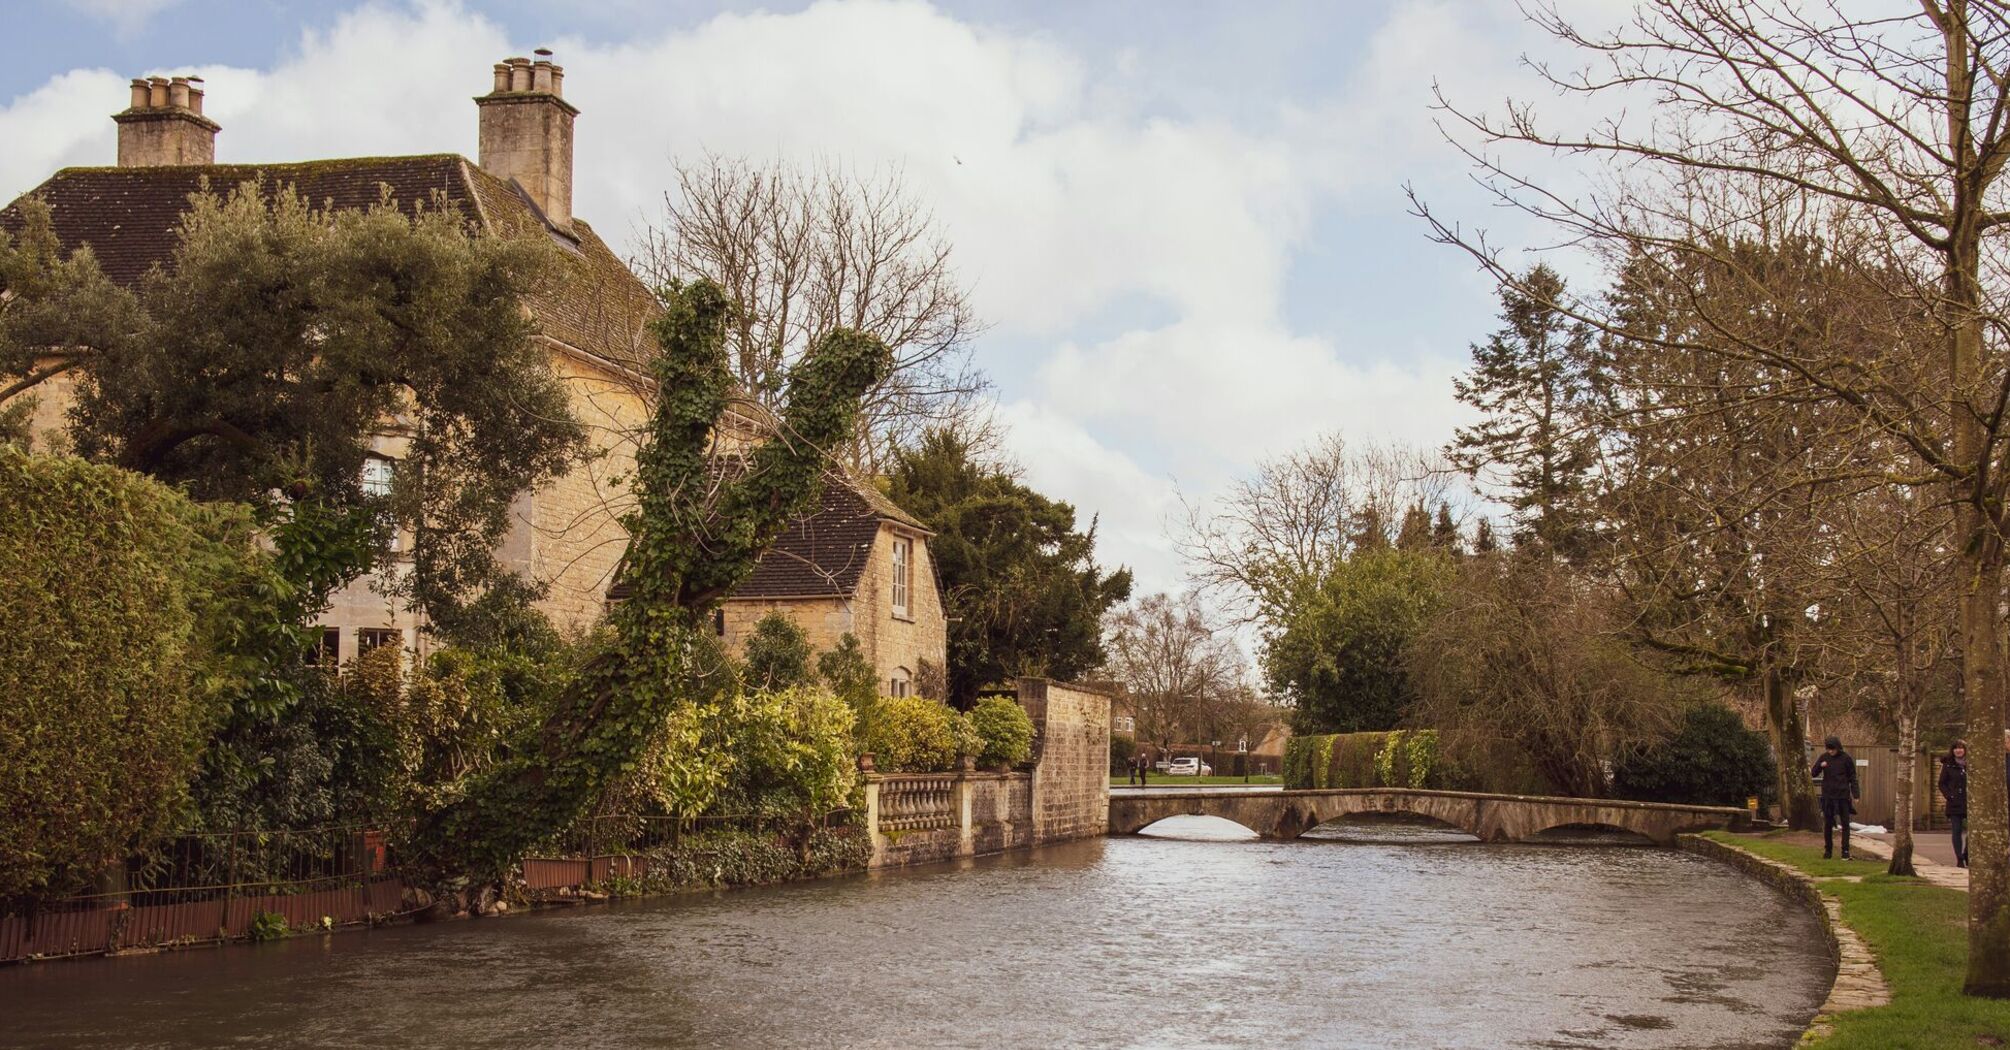 Venice of the Cotswolds: what hides one of the most romantic places in Great Britain, where couples are advised to visit